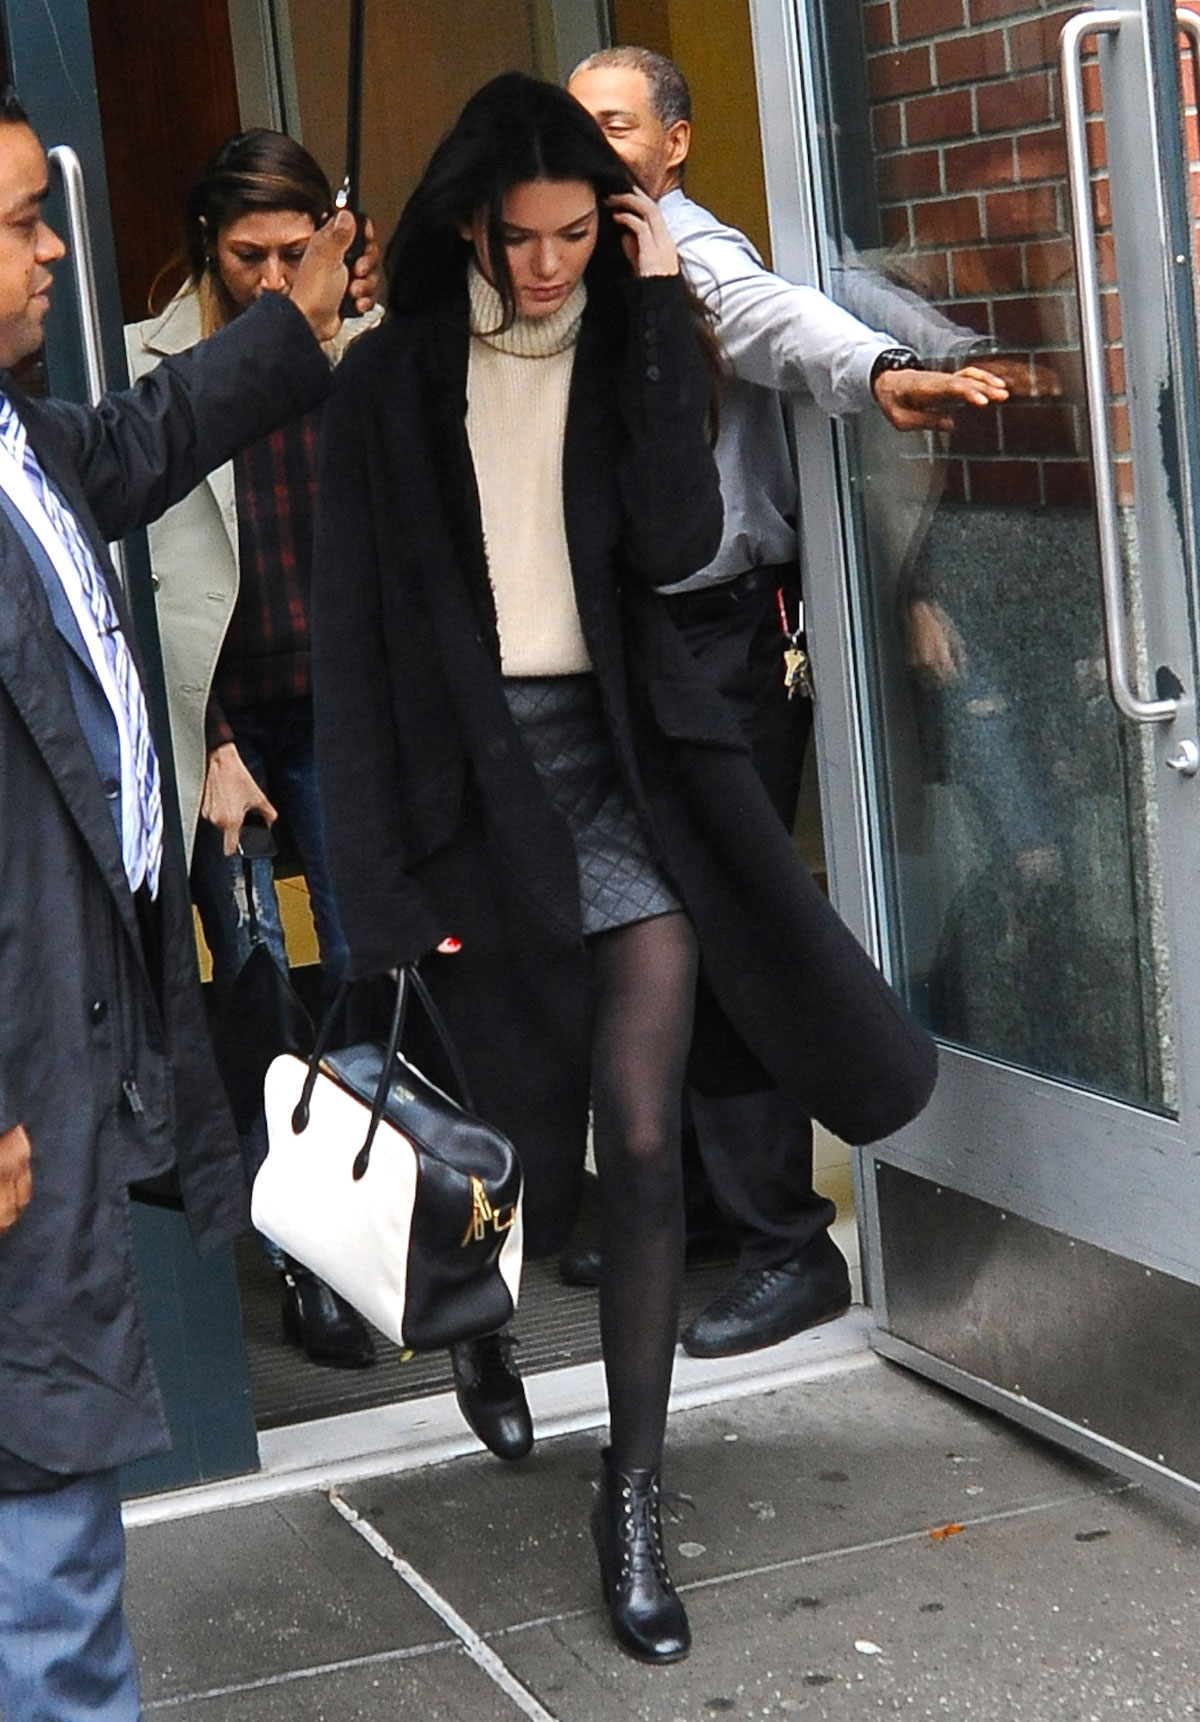 Kendall Jenner out and about in New York City